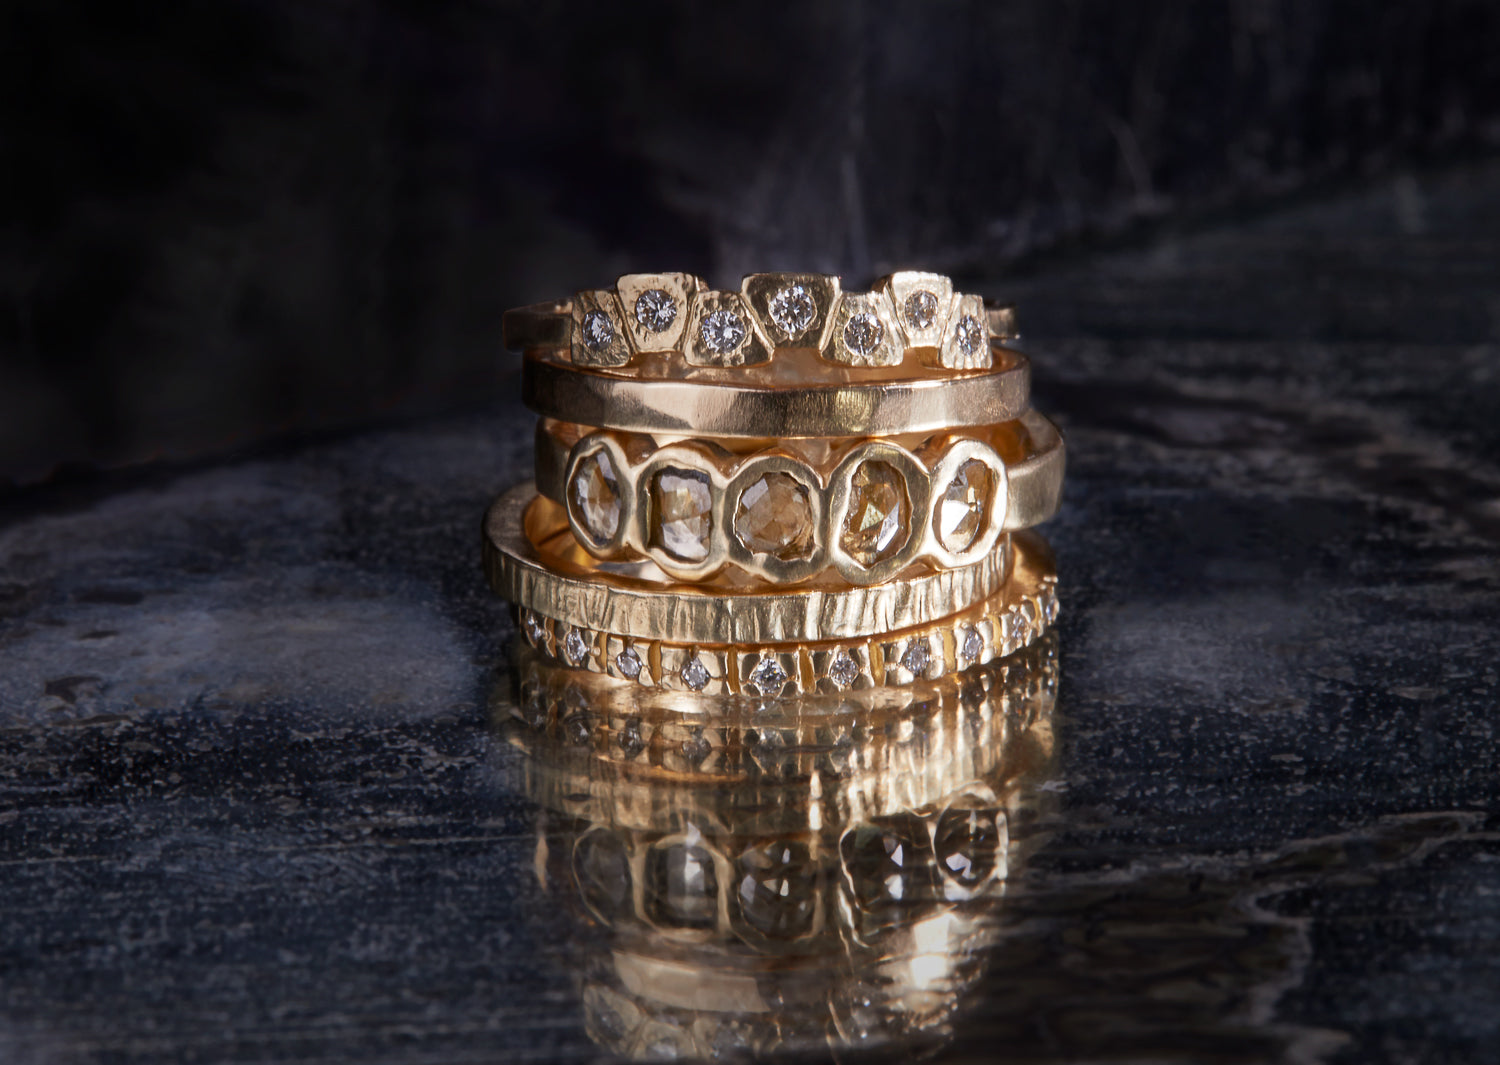 The Blair Anniversary Band showcases ten diamonds set across the front of a thin and delicate hammered 14k gold band.